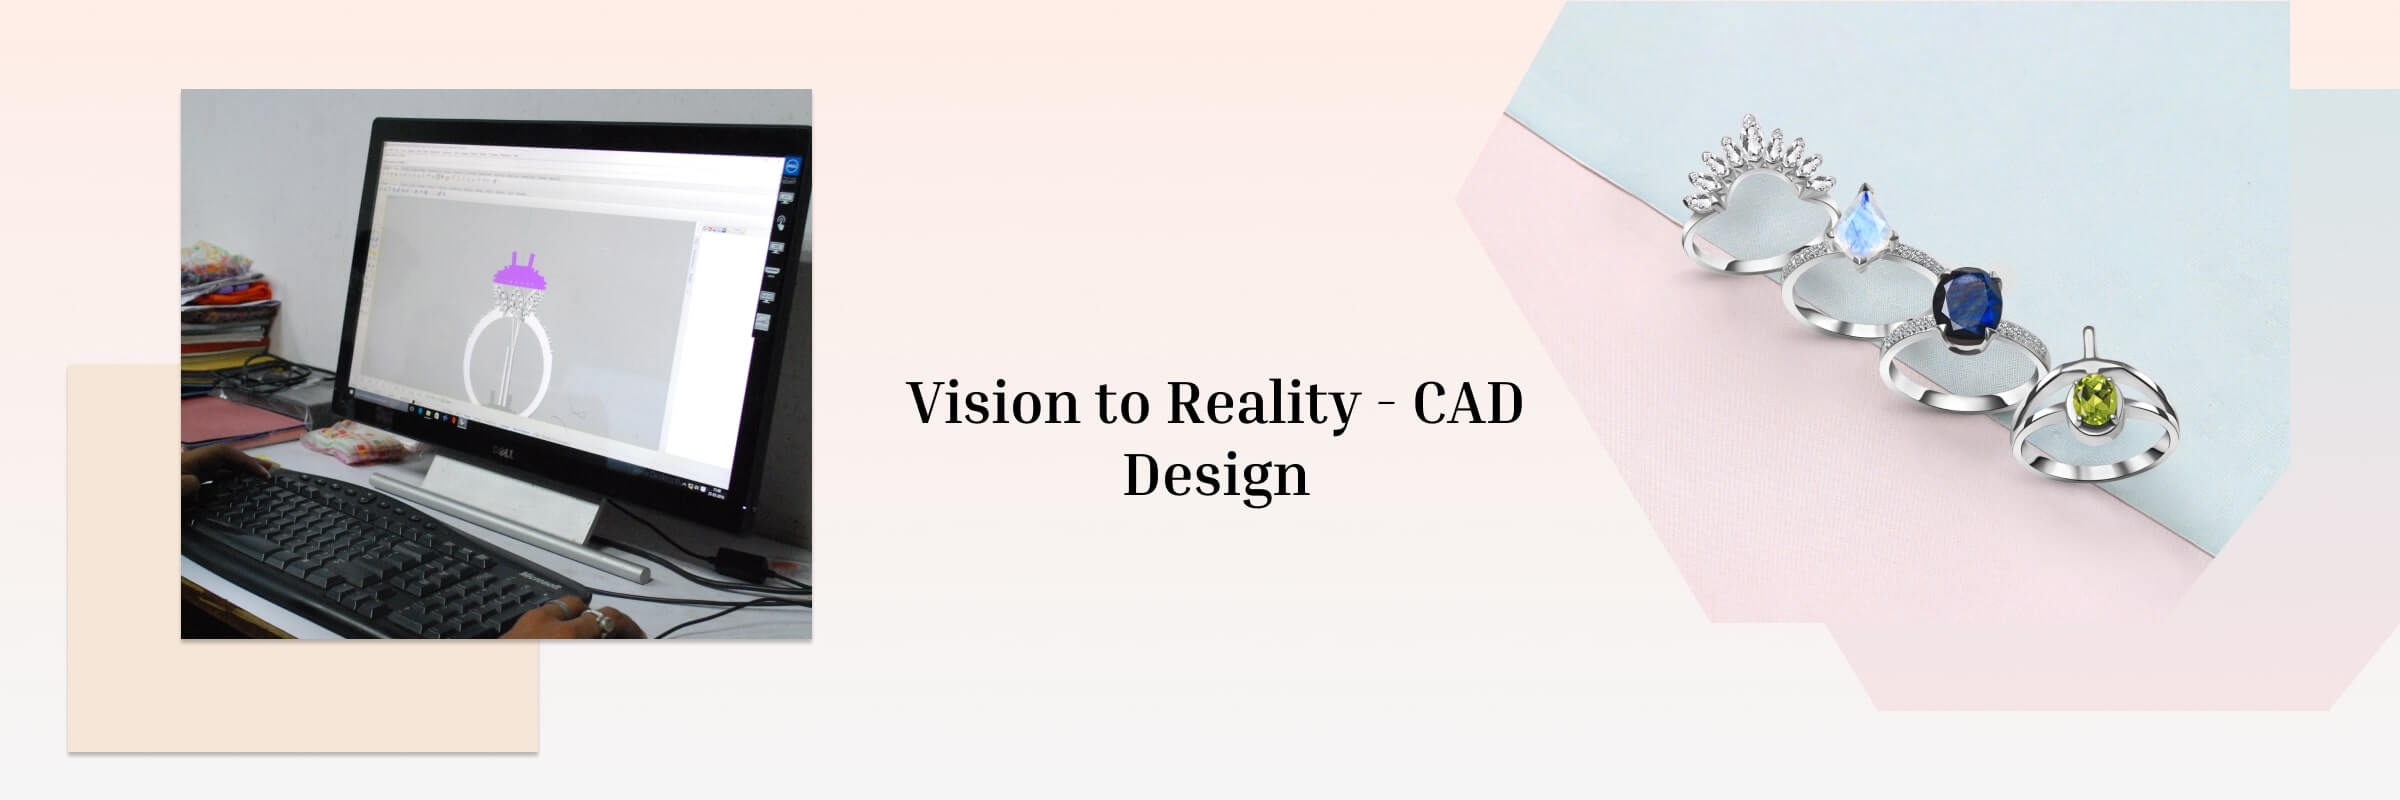 CAD software is used to create your design